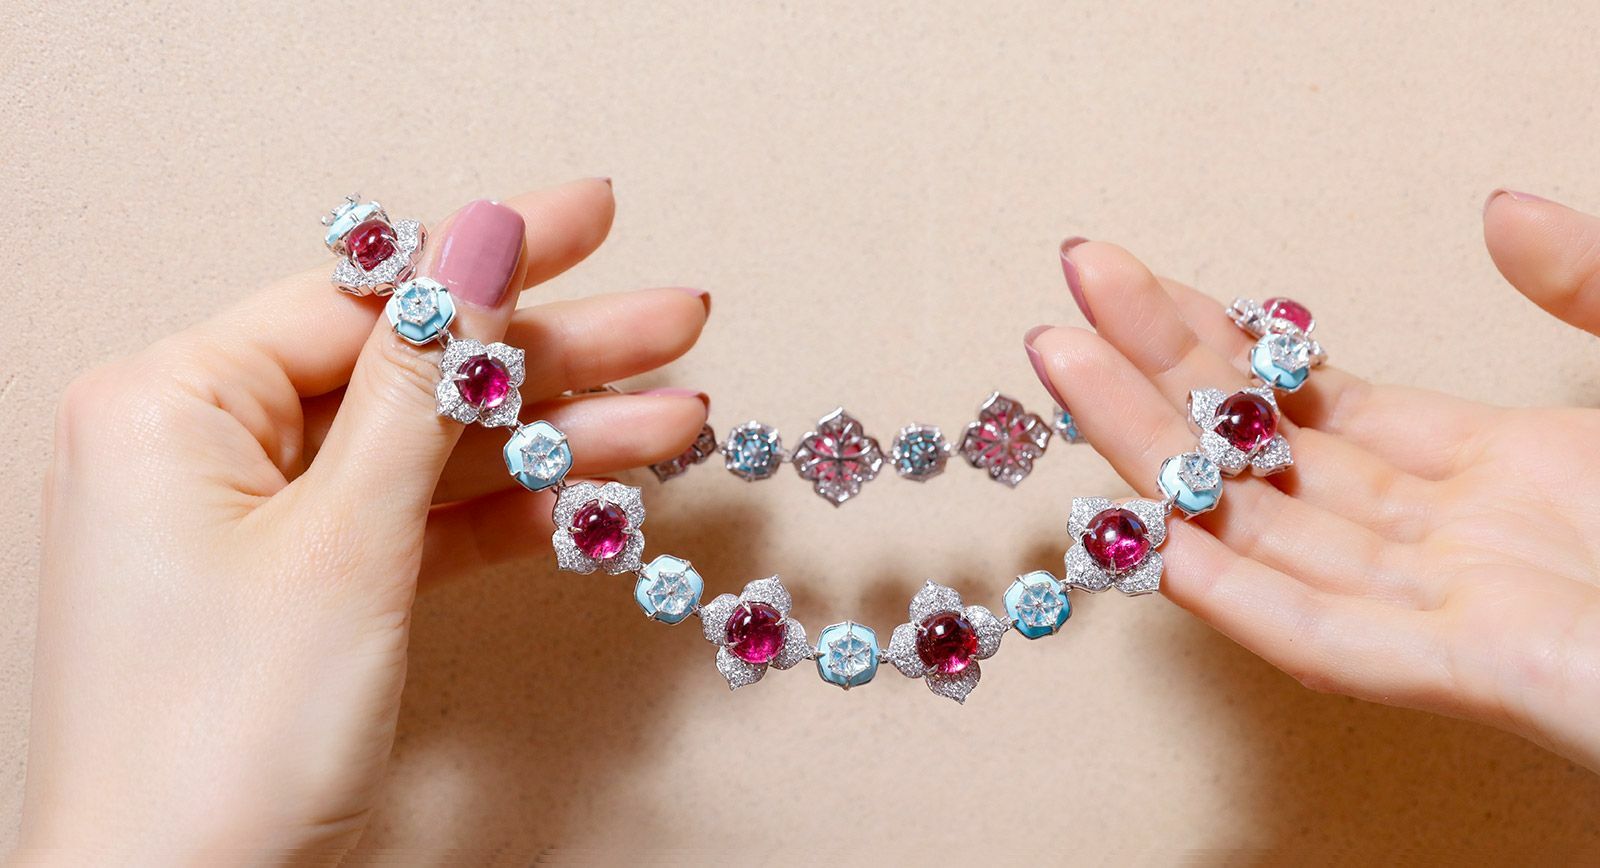 Panchoo necklace with turquoise, spinels and diamonds